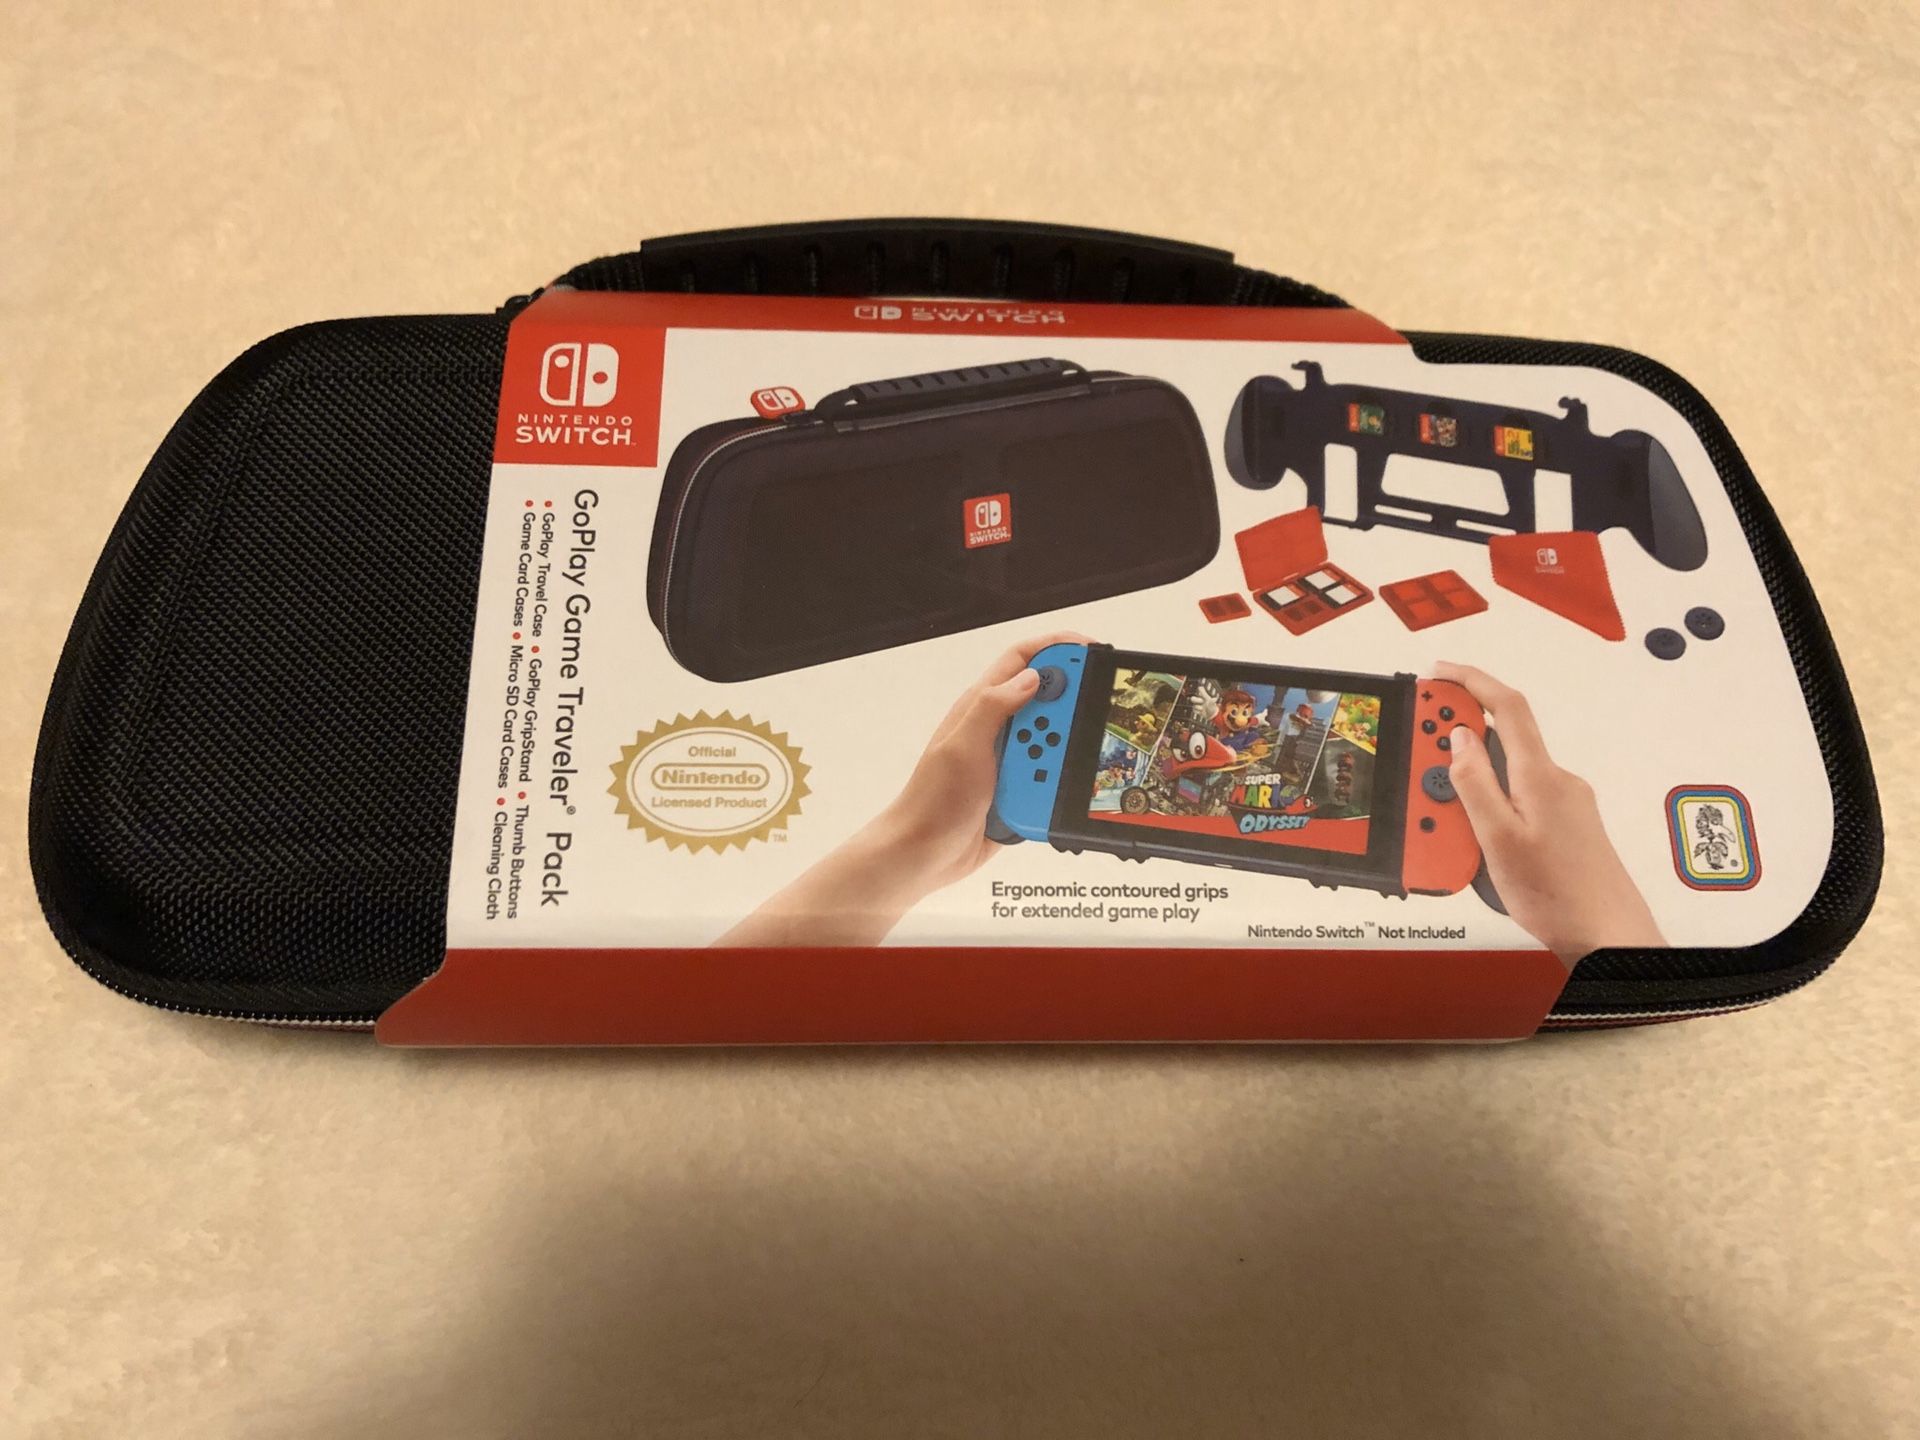 Brand new Nintendo Switch GoPlay Traveler pack case and grips